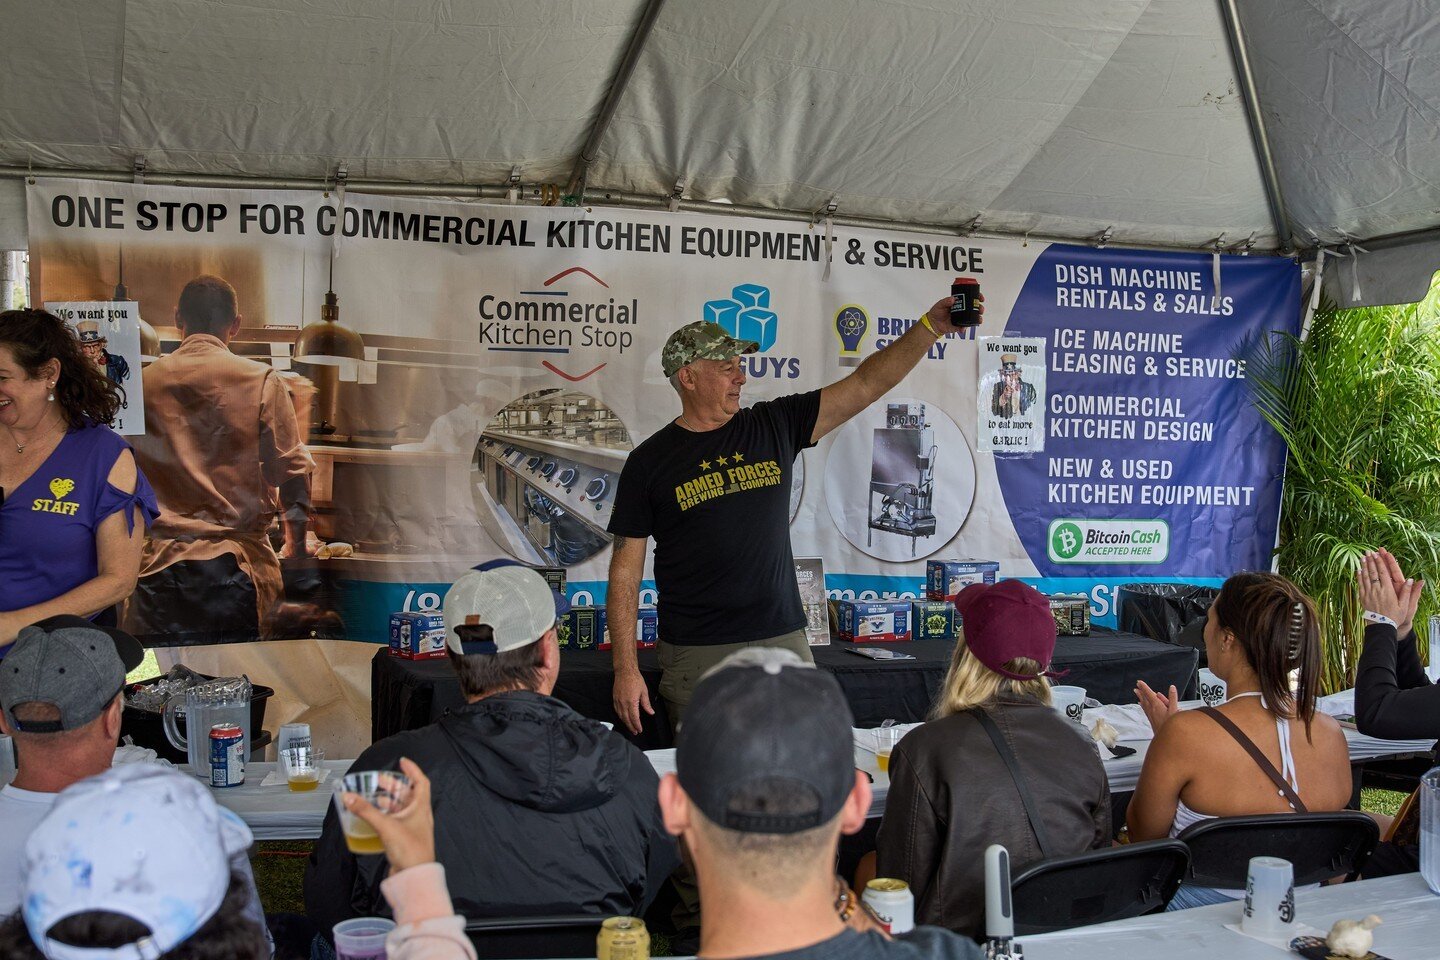 Who doesn't like a good beer tasting seminar?! Armed Forces Brewing bringing the hops! 
.
.
.
📸 @garlicfestfl
👉 Have Event or Branding/Commercial photography needs? Let's connect and see how I can help!
✉️ john@indi-creative.net / 📲 text 561-322-9